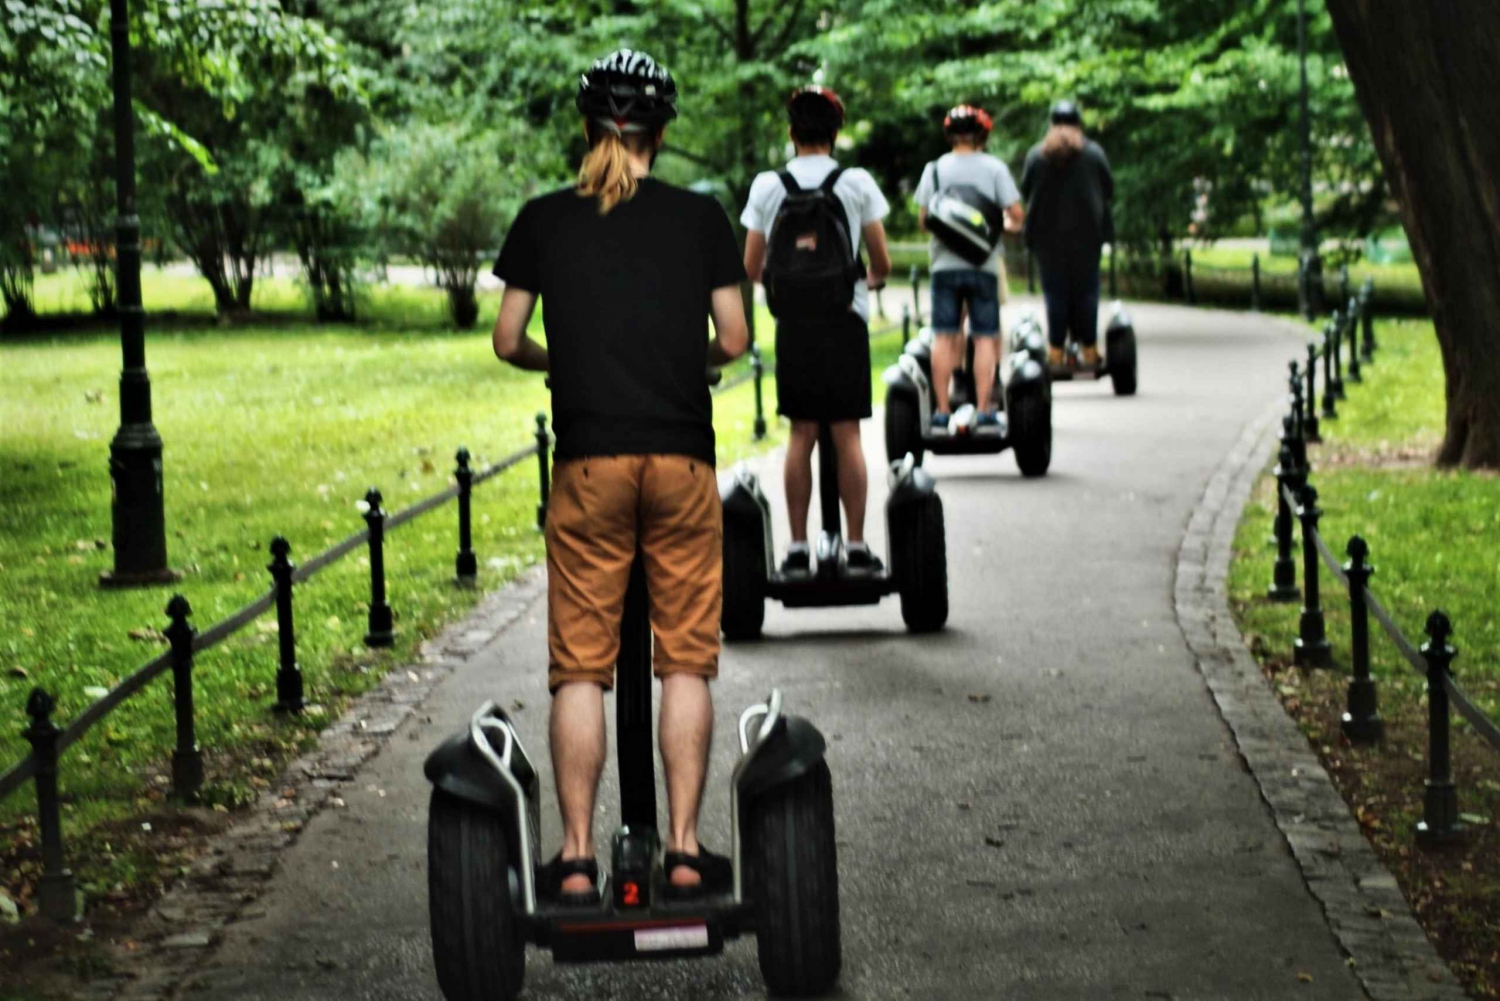 Krakow: Old Town and Wawel Castle 30-Minute Segway X2 Tour